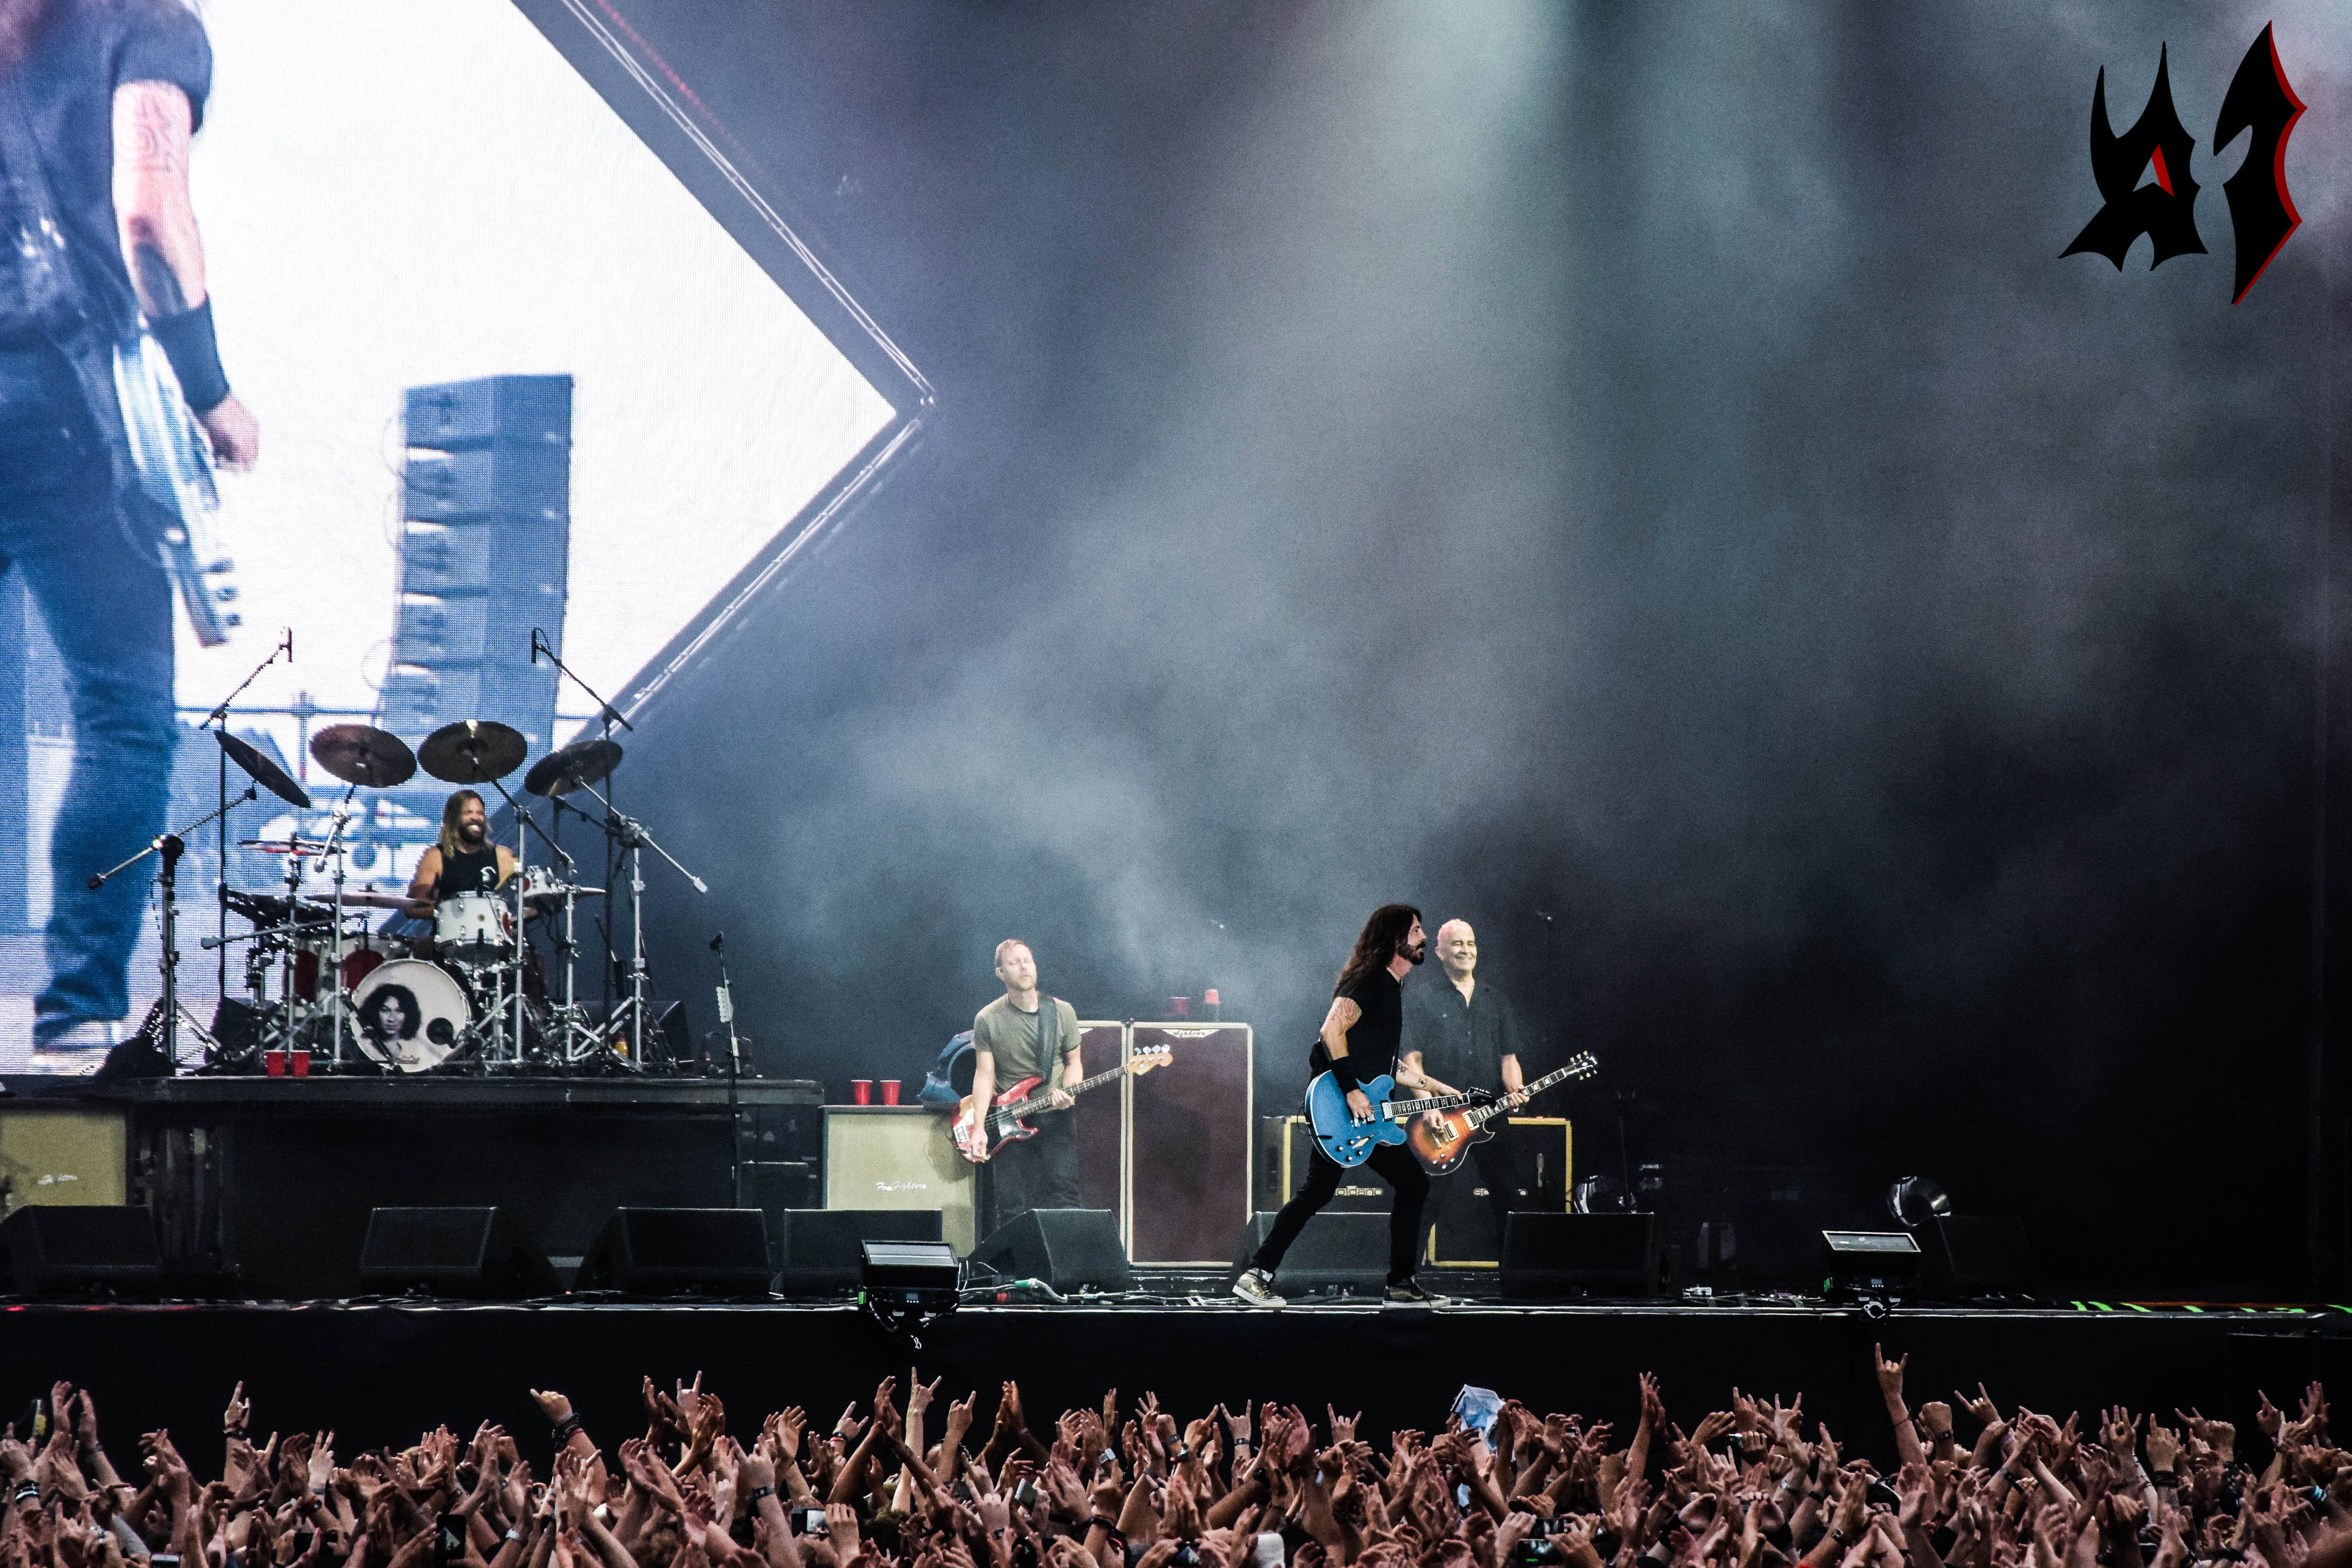 Donwload 2018 – Day 3 - Foo Fighters 3